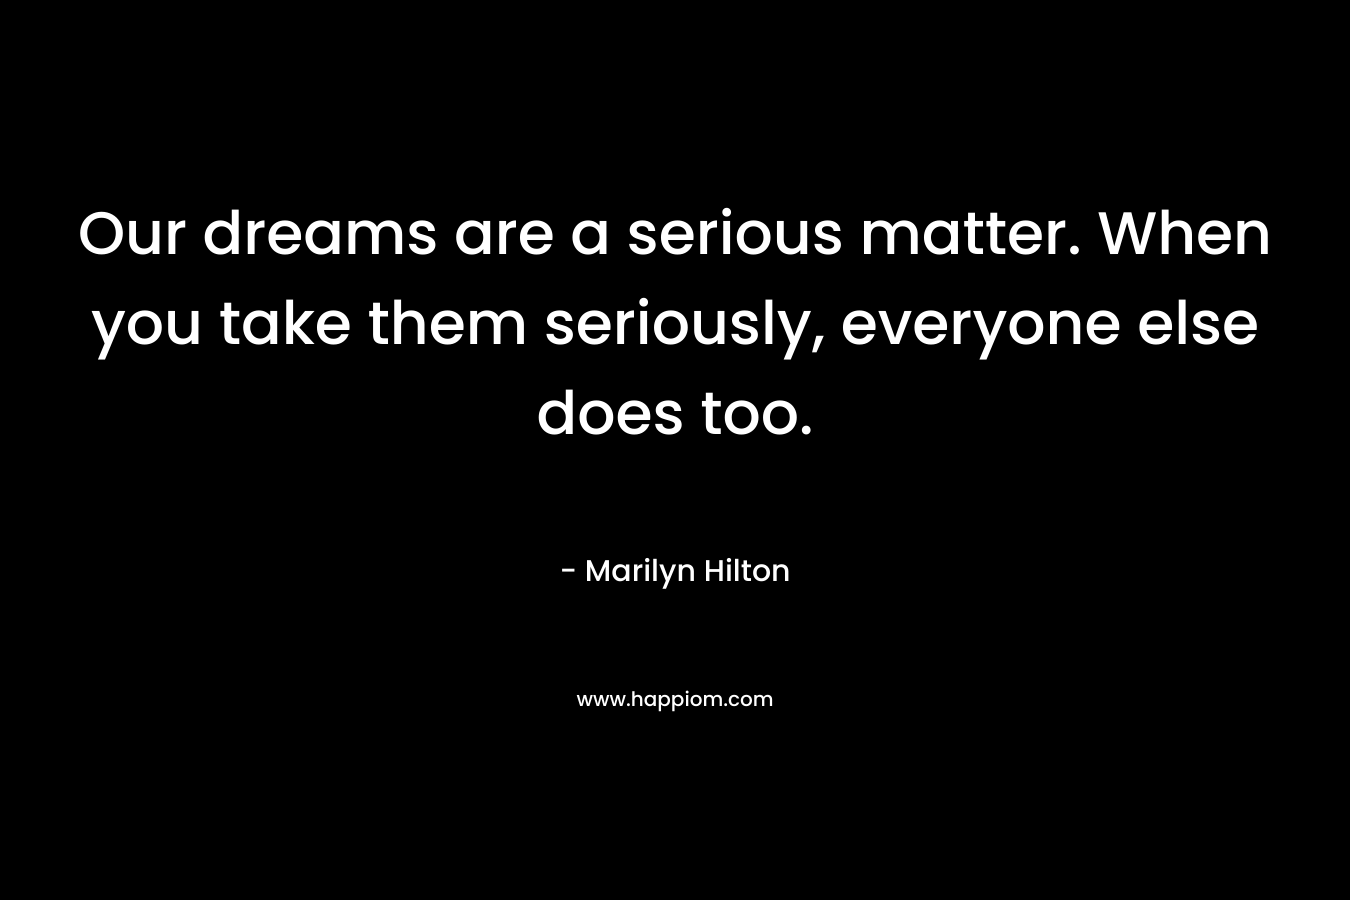 Our dreams are a serious matter. When you take them seriously, everyone else does too. – Marilyn Hilton